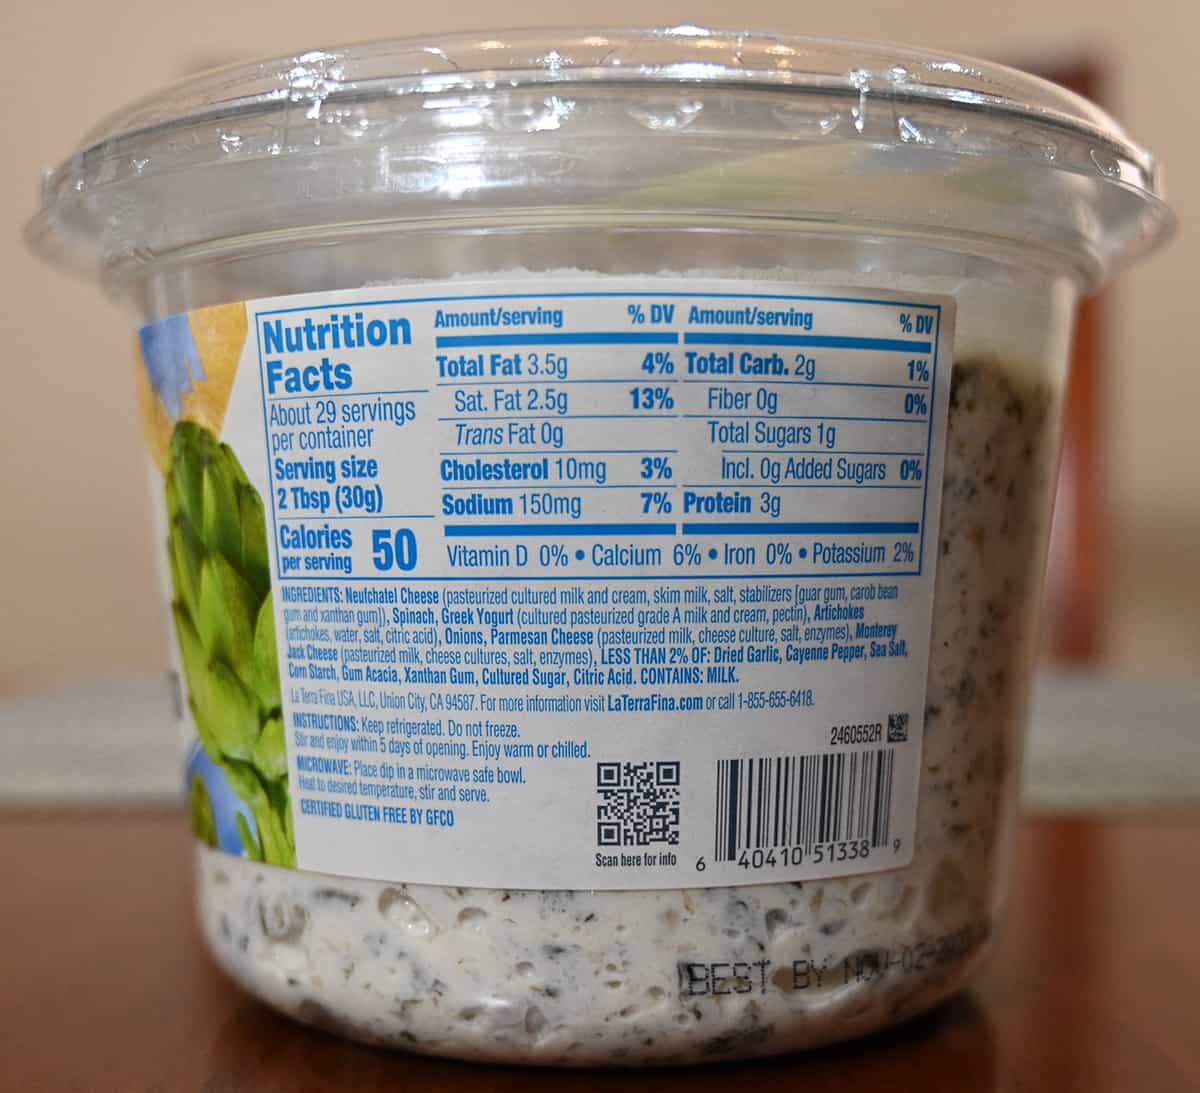 Closeup image of the back label on the dip showing ingredients, nutrition facts and storage instructions.